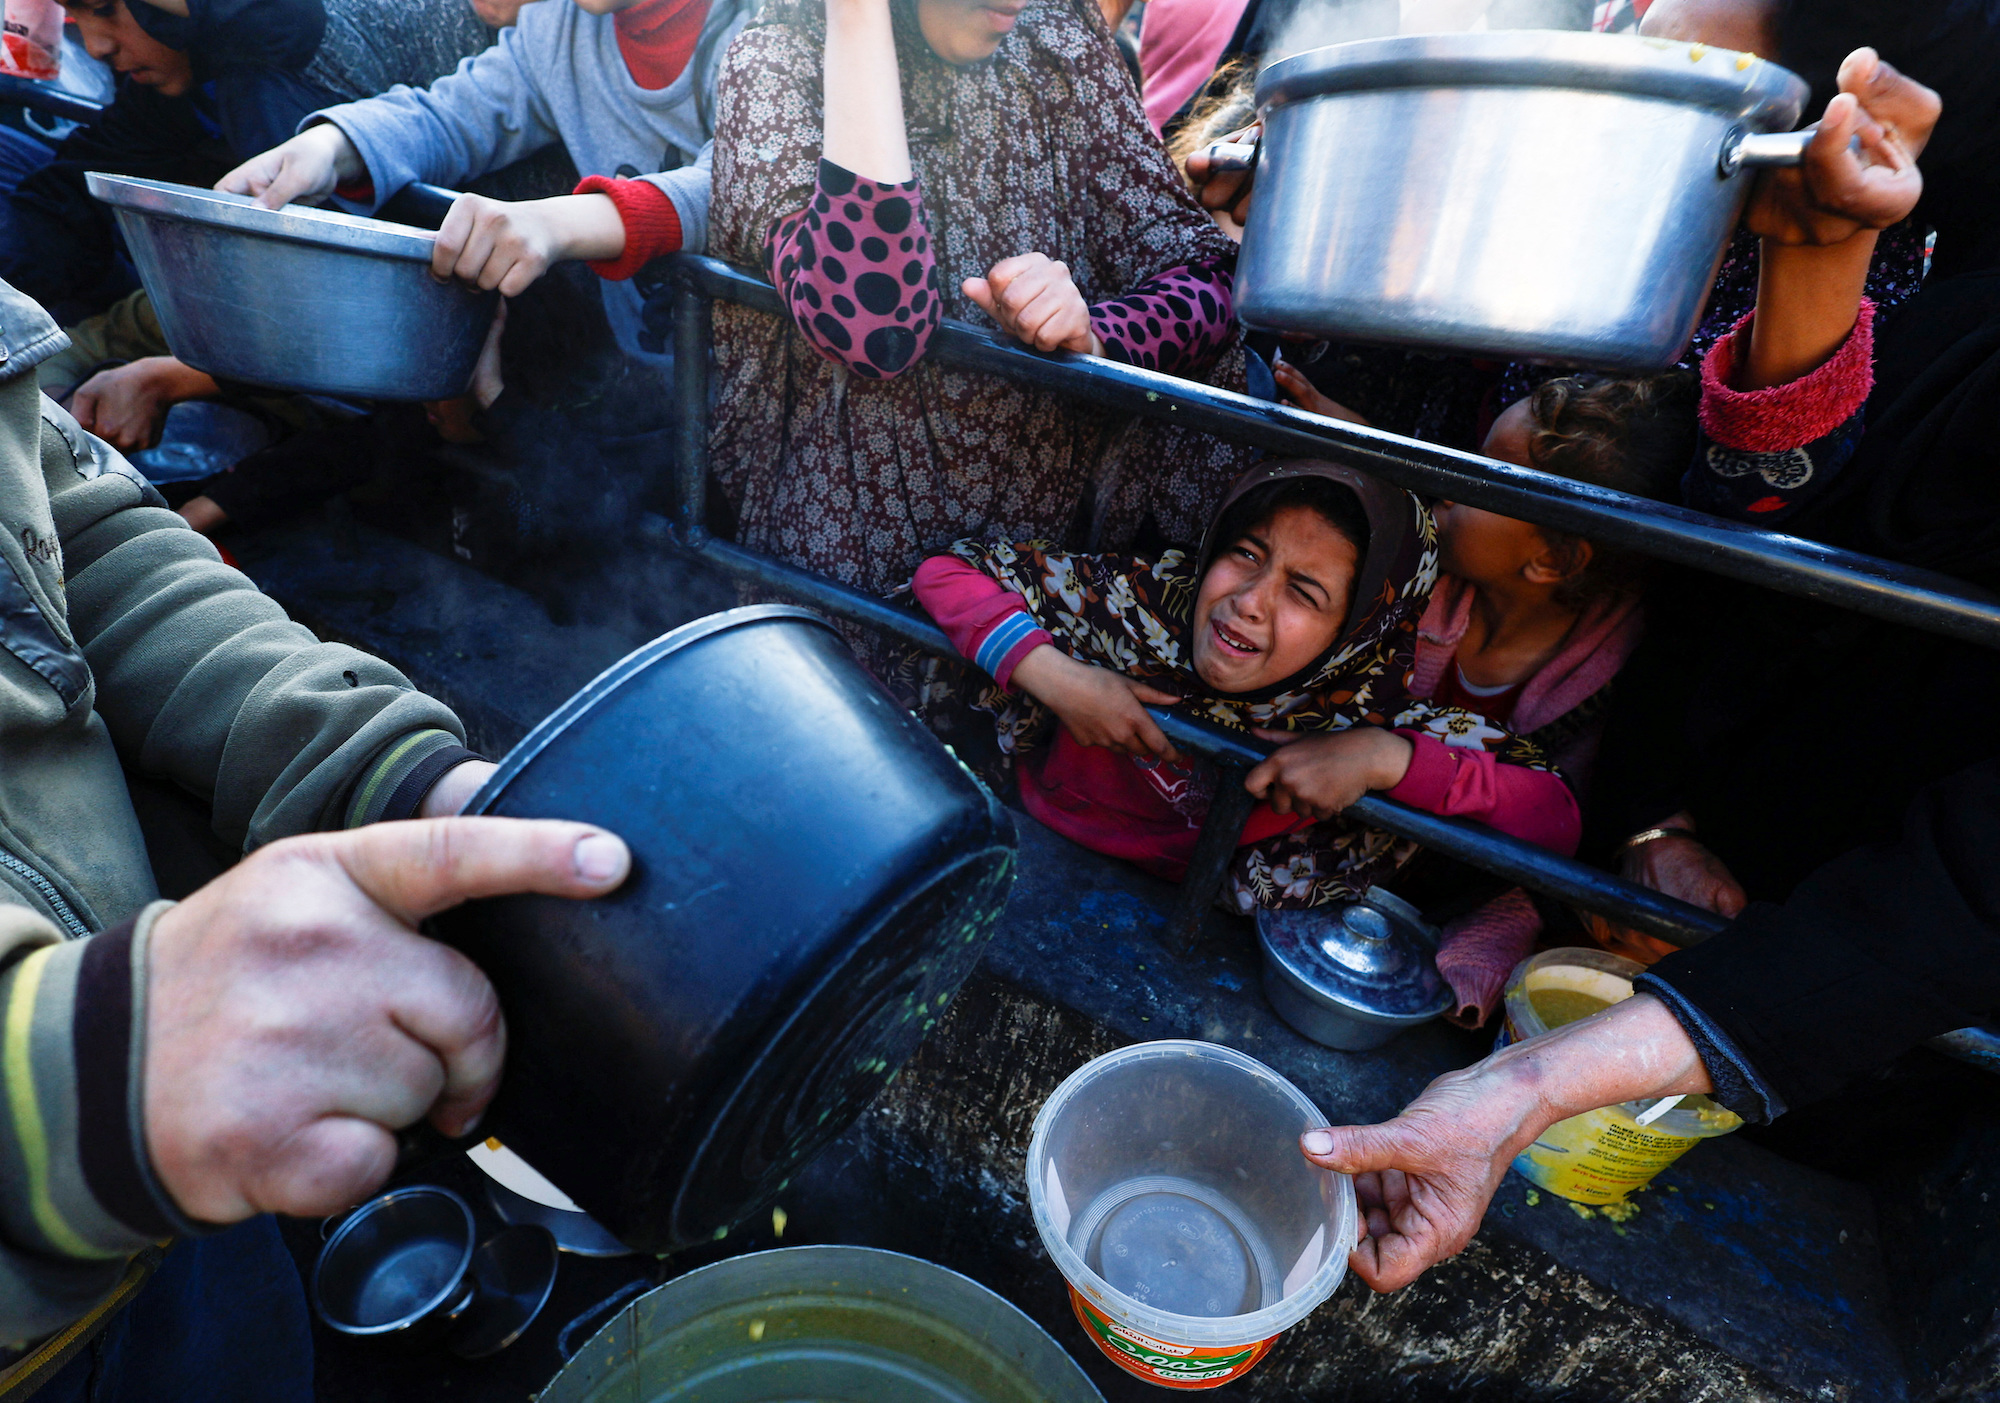 A child reacts as Palestinians wait to receive food��in Rafah, southern Gaza on March 13.